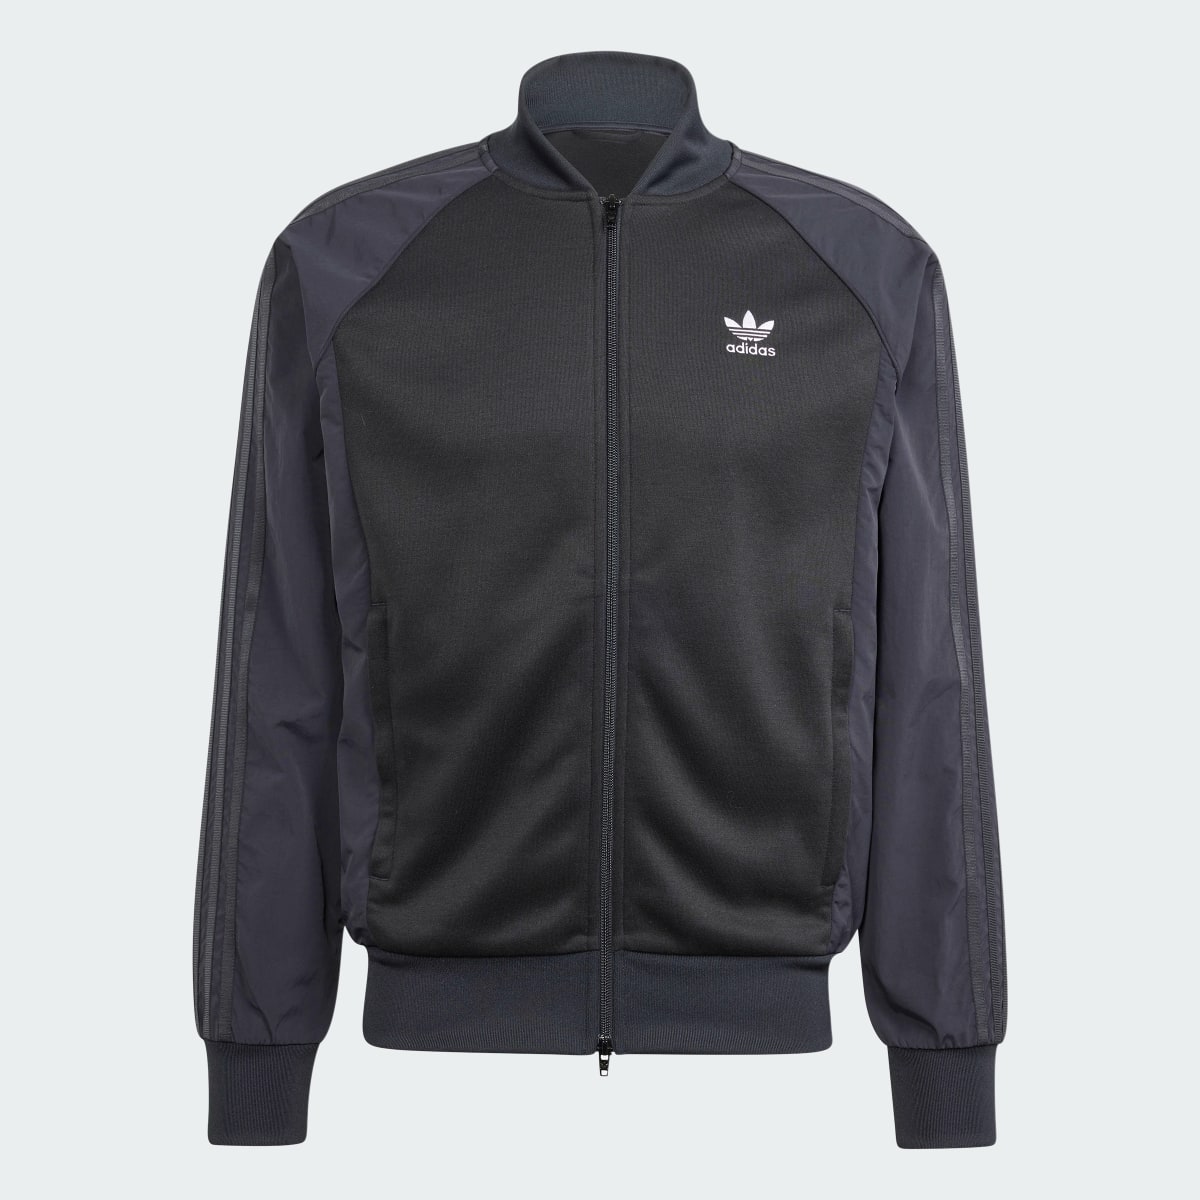 Adidas Adicolor Re-Pro SST Material Mix Track Jacket. 5